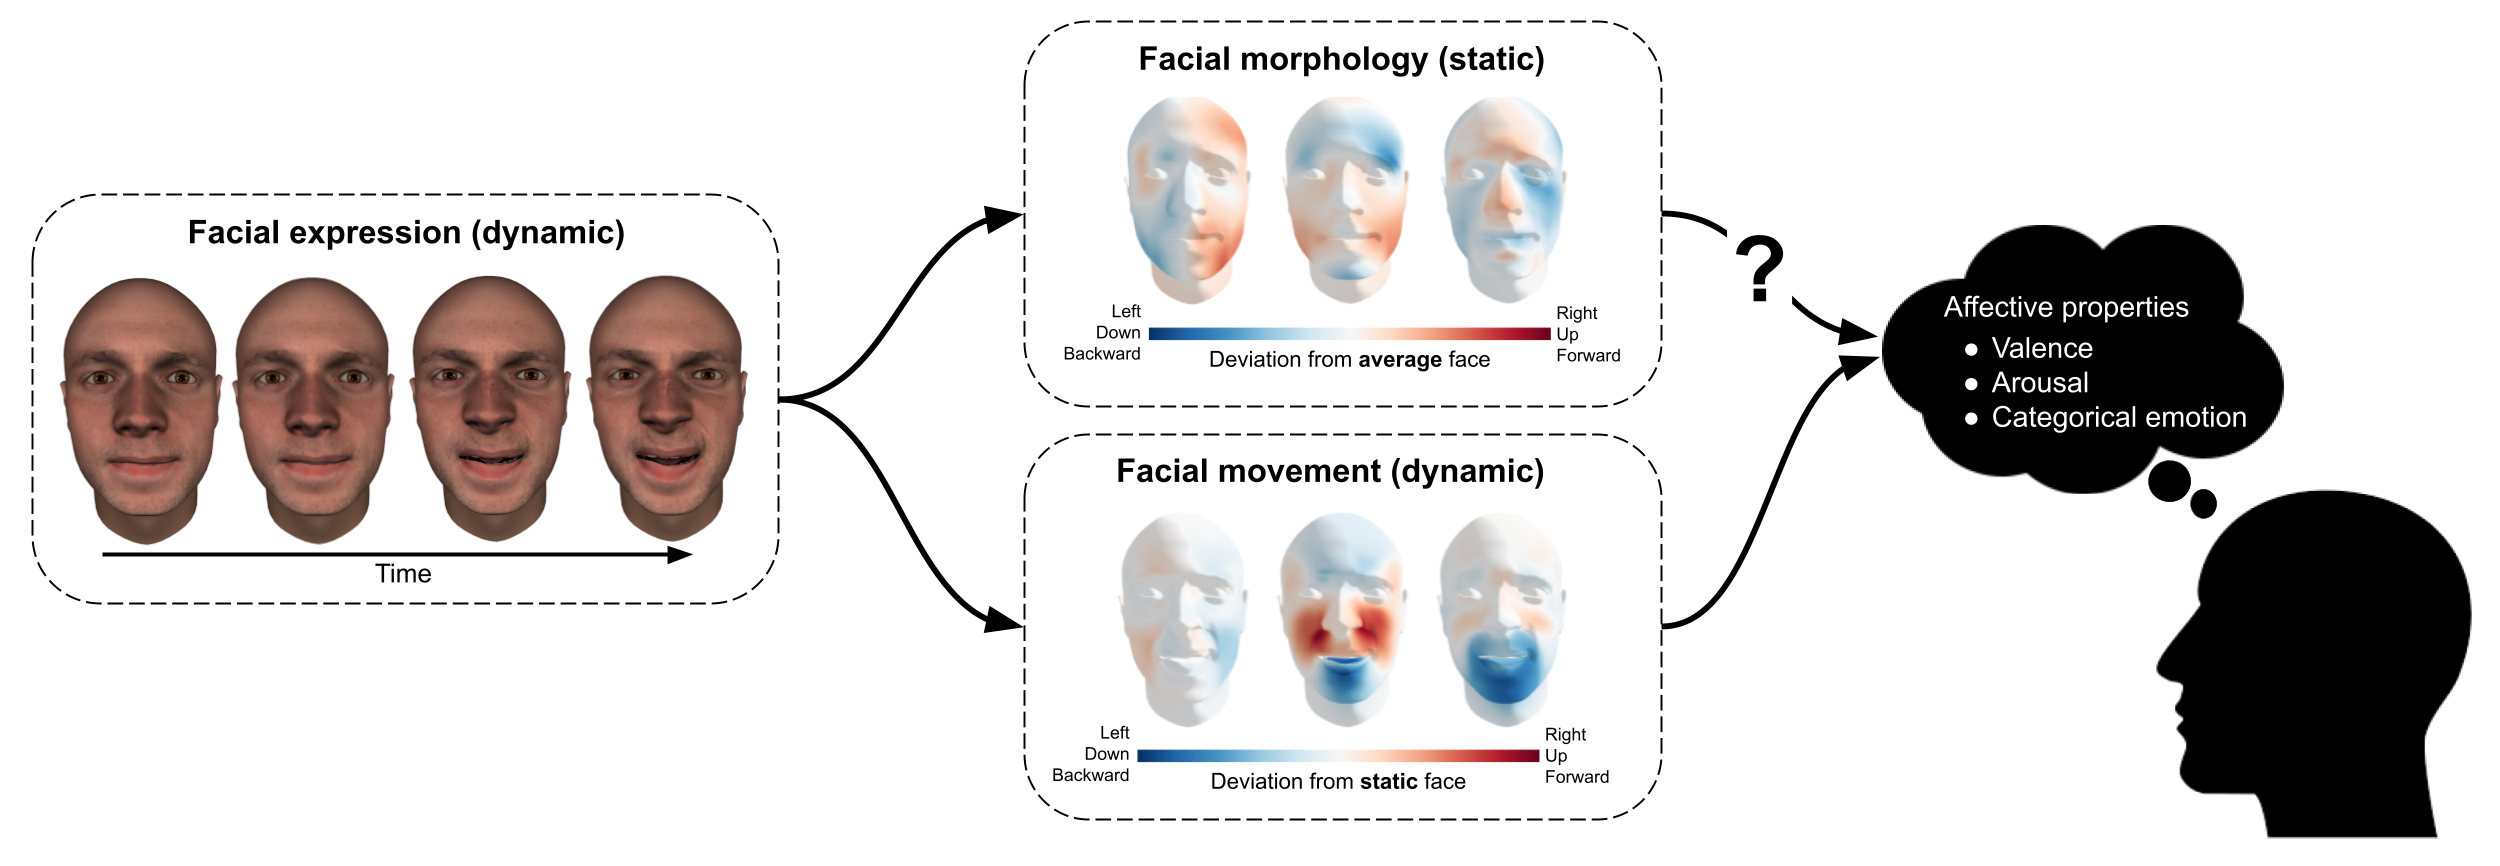 Decomposition of facial expressions in static information (facial morphology) and dynamic information (facial movement), where static information is operationalized as shape deviation relative to the average face while dynamic information is operationalized as shape deviation relative to the static face. The current study’s aim is to quantify the importance of static information, relative to dynamic information, in affective perception.